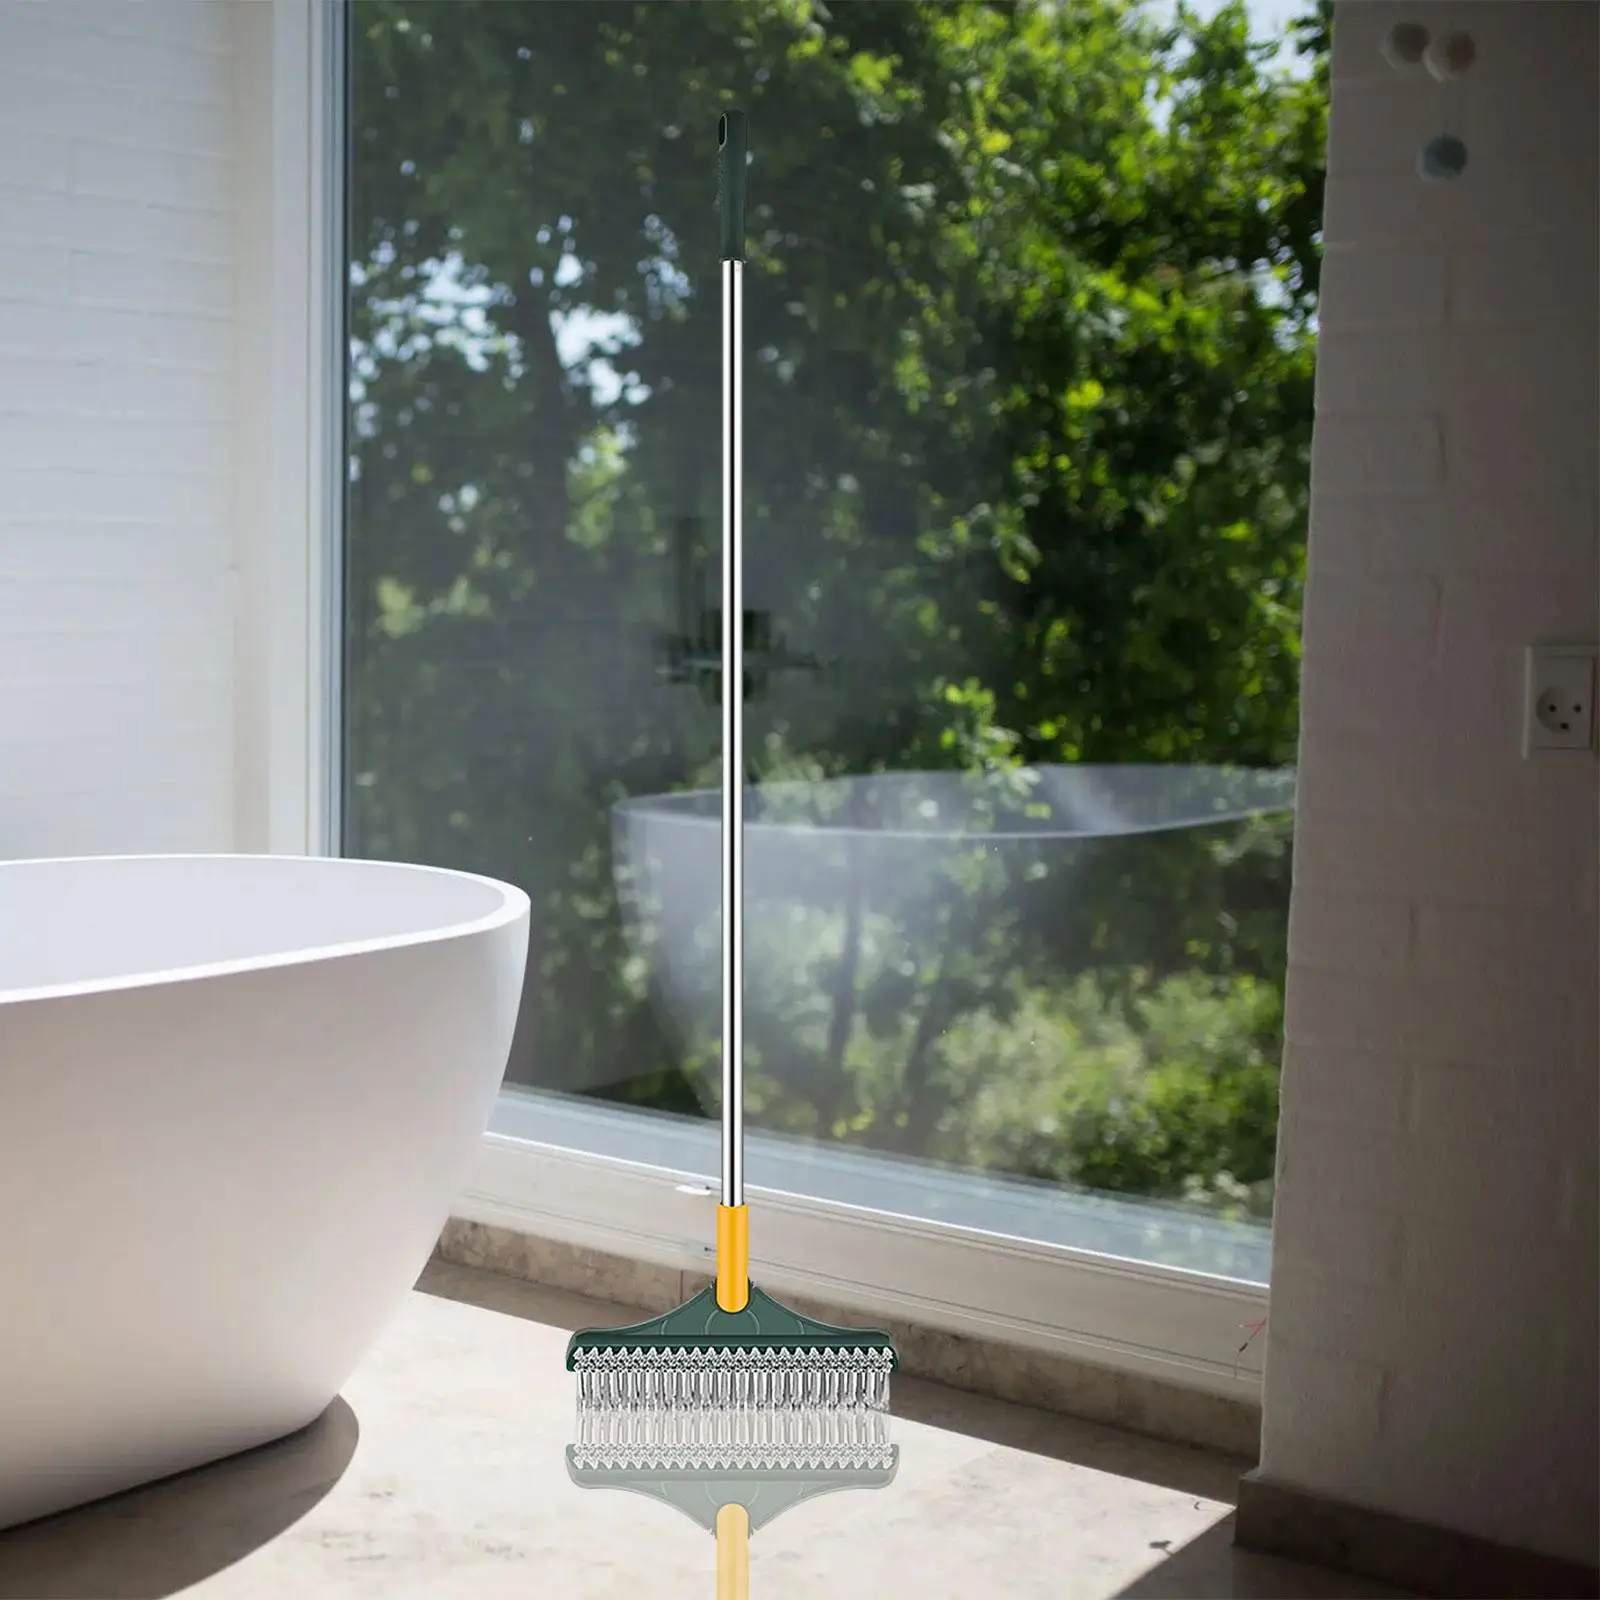 Floor Scrub Brush Floor Scrubber Brush Cleaning Scrub Brush with Squeegee Shower Scrubber for Glass Floor Grout Kitchen Pool